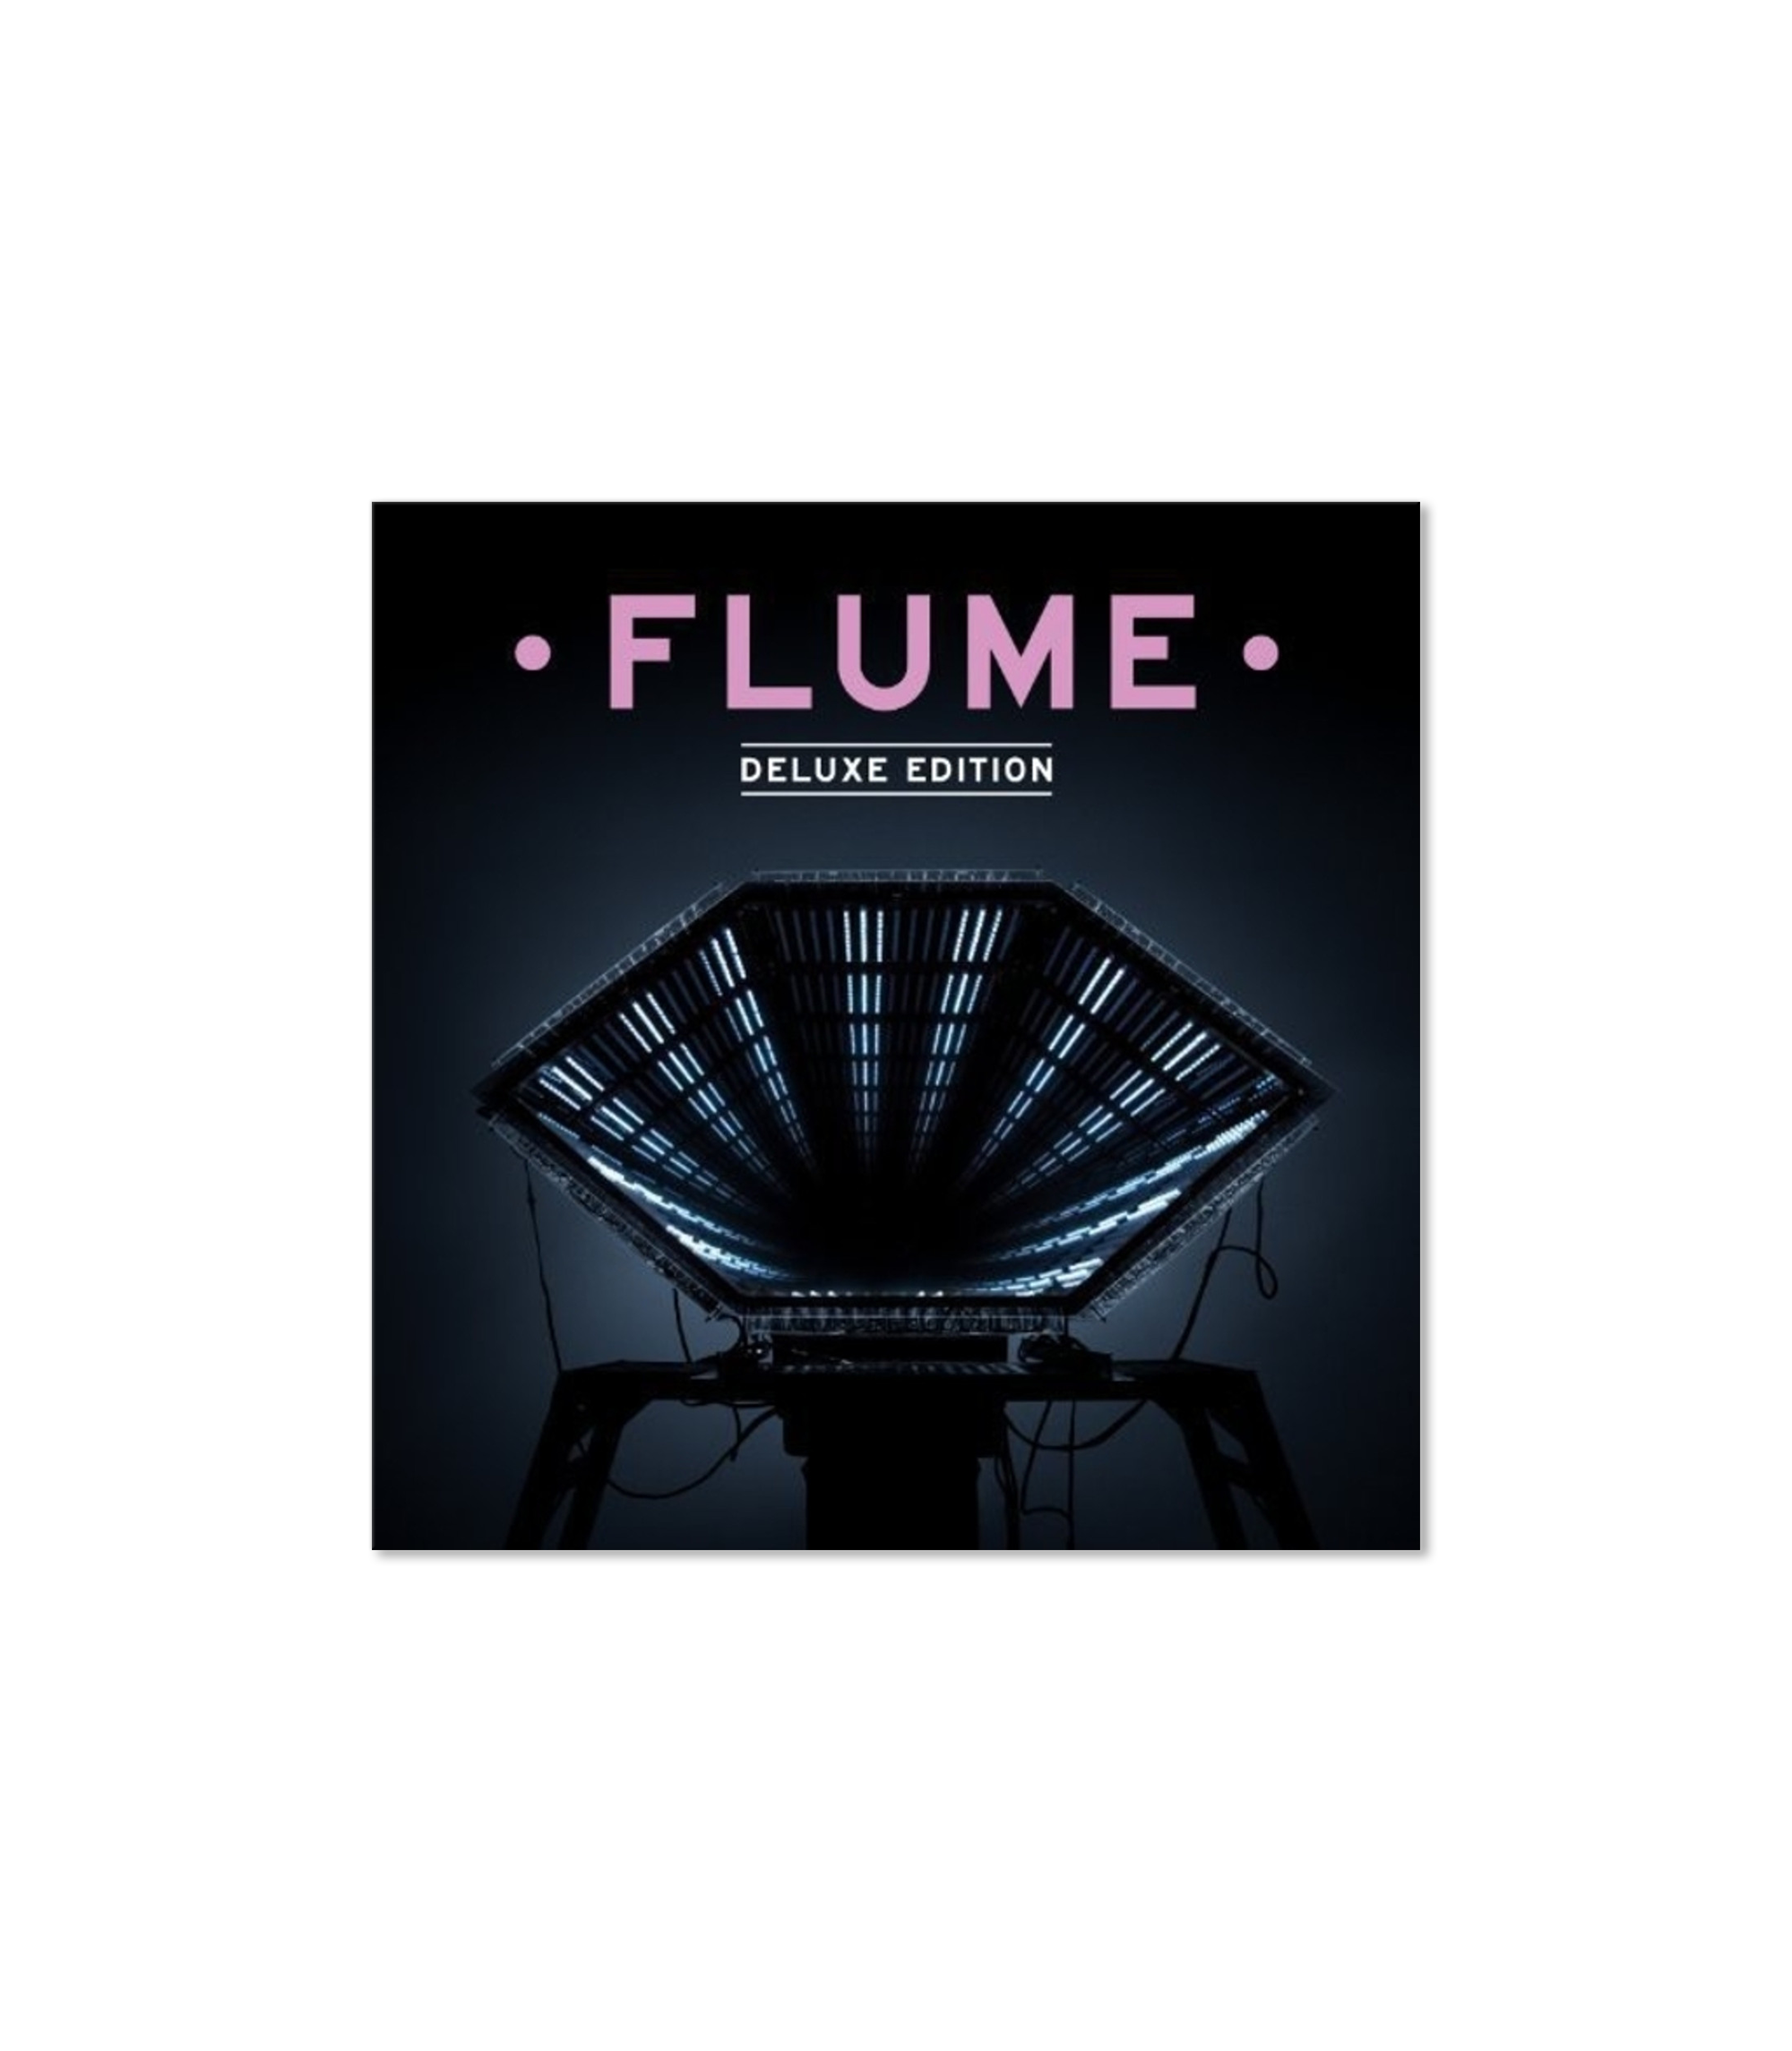 Flume - Deluxe Edition